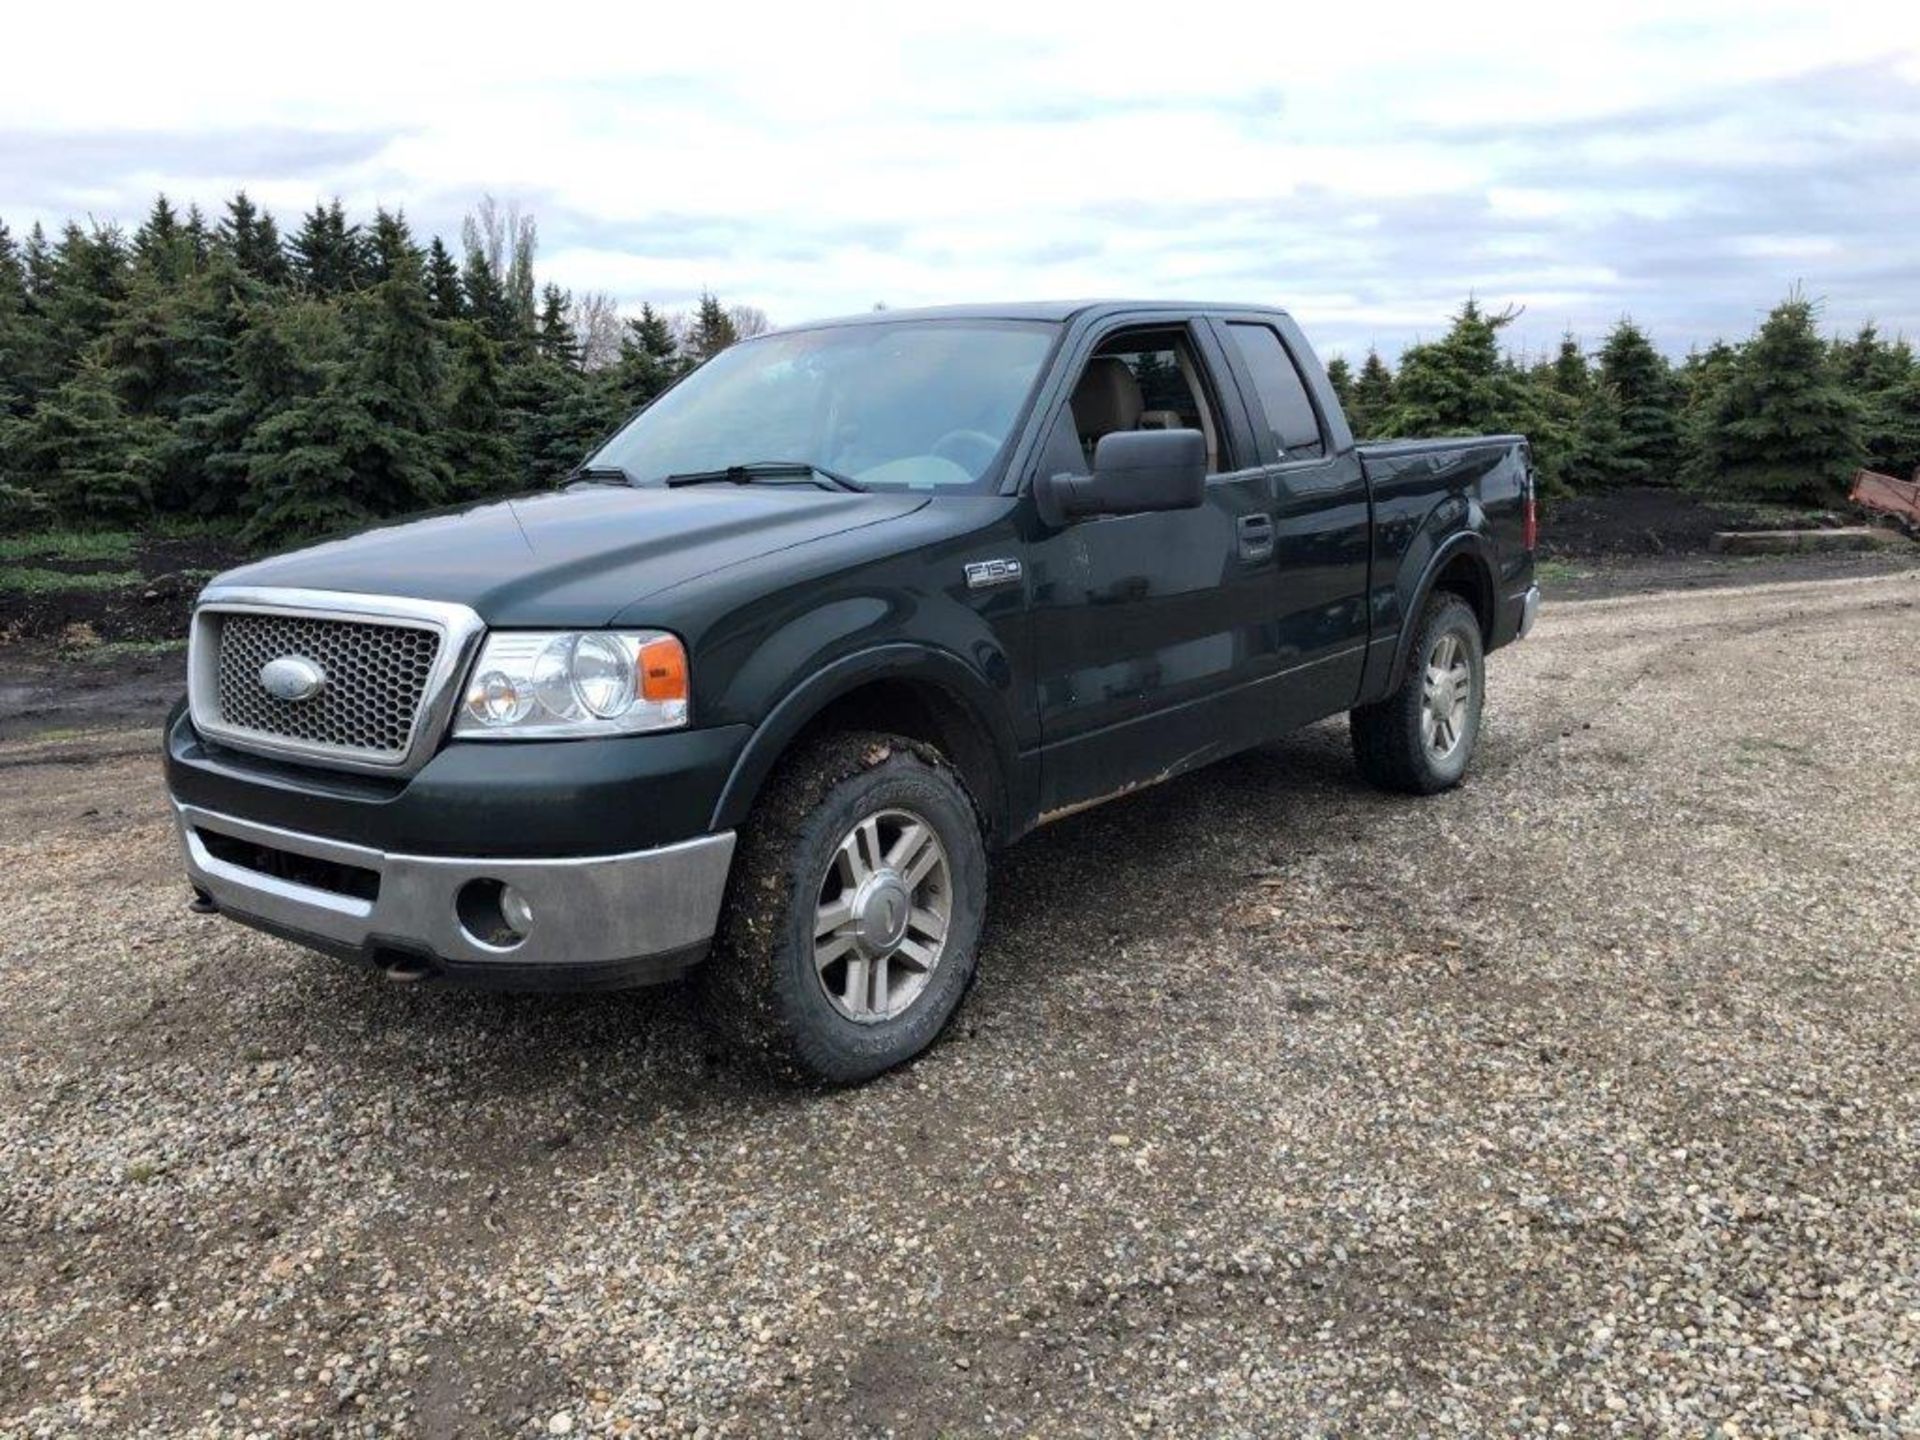 2006 FORD F150 LARIAT P/U TRUCK, 4X4, EXT CAB, LEATHER, 235,000KM SHOWING, S/N 1FTPX14556FA86613